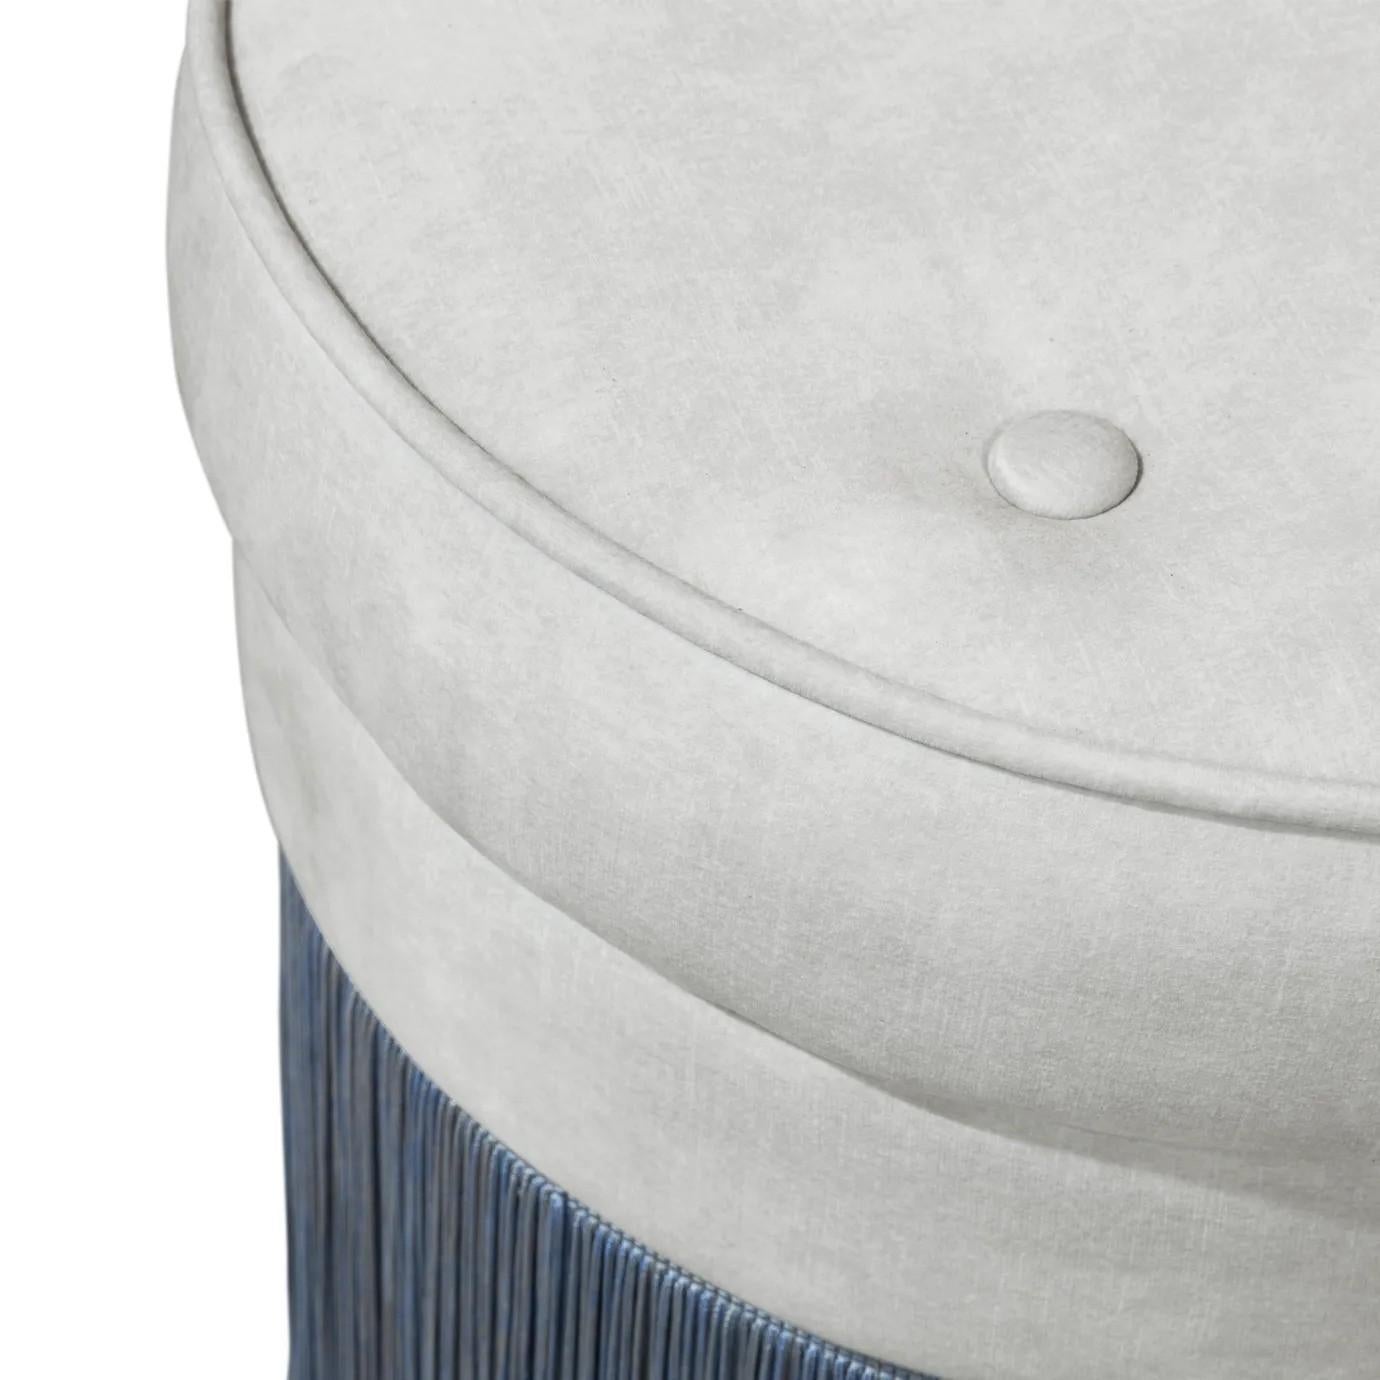 Each of these fashionable pouf stools feature their own unique combination of contrasting materials. One of a trio of KOKET pouf designs, the tailored button tufted seats, satin brass belts and flowing fringed skirts make this lovely lady the